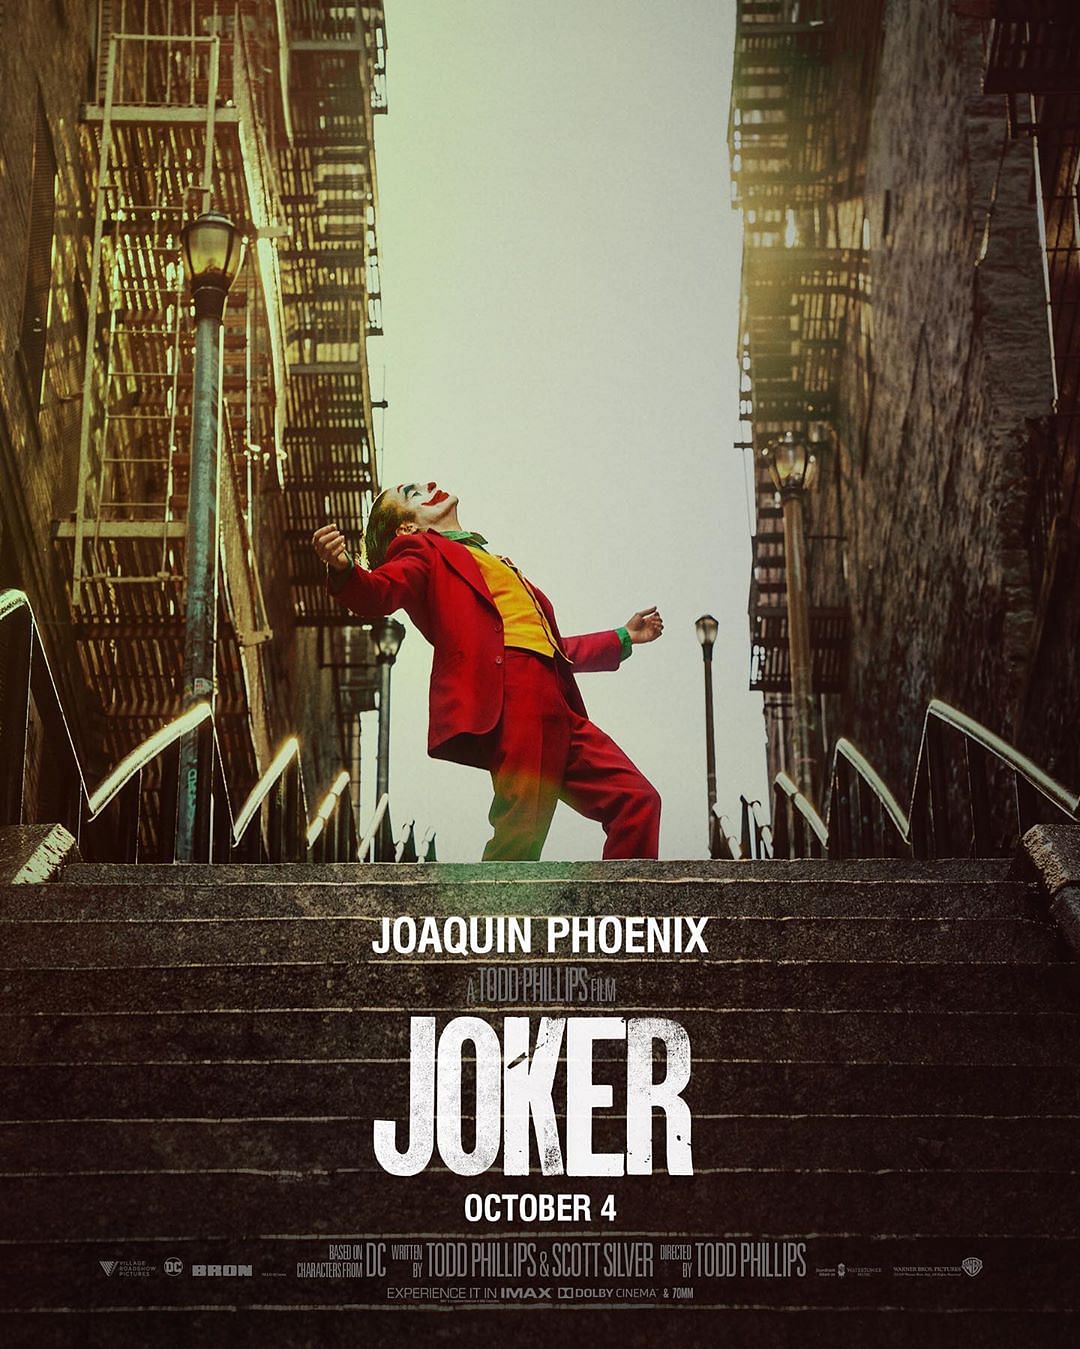 ‘Joker’ is directed by Todd Philips.